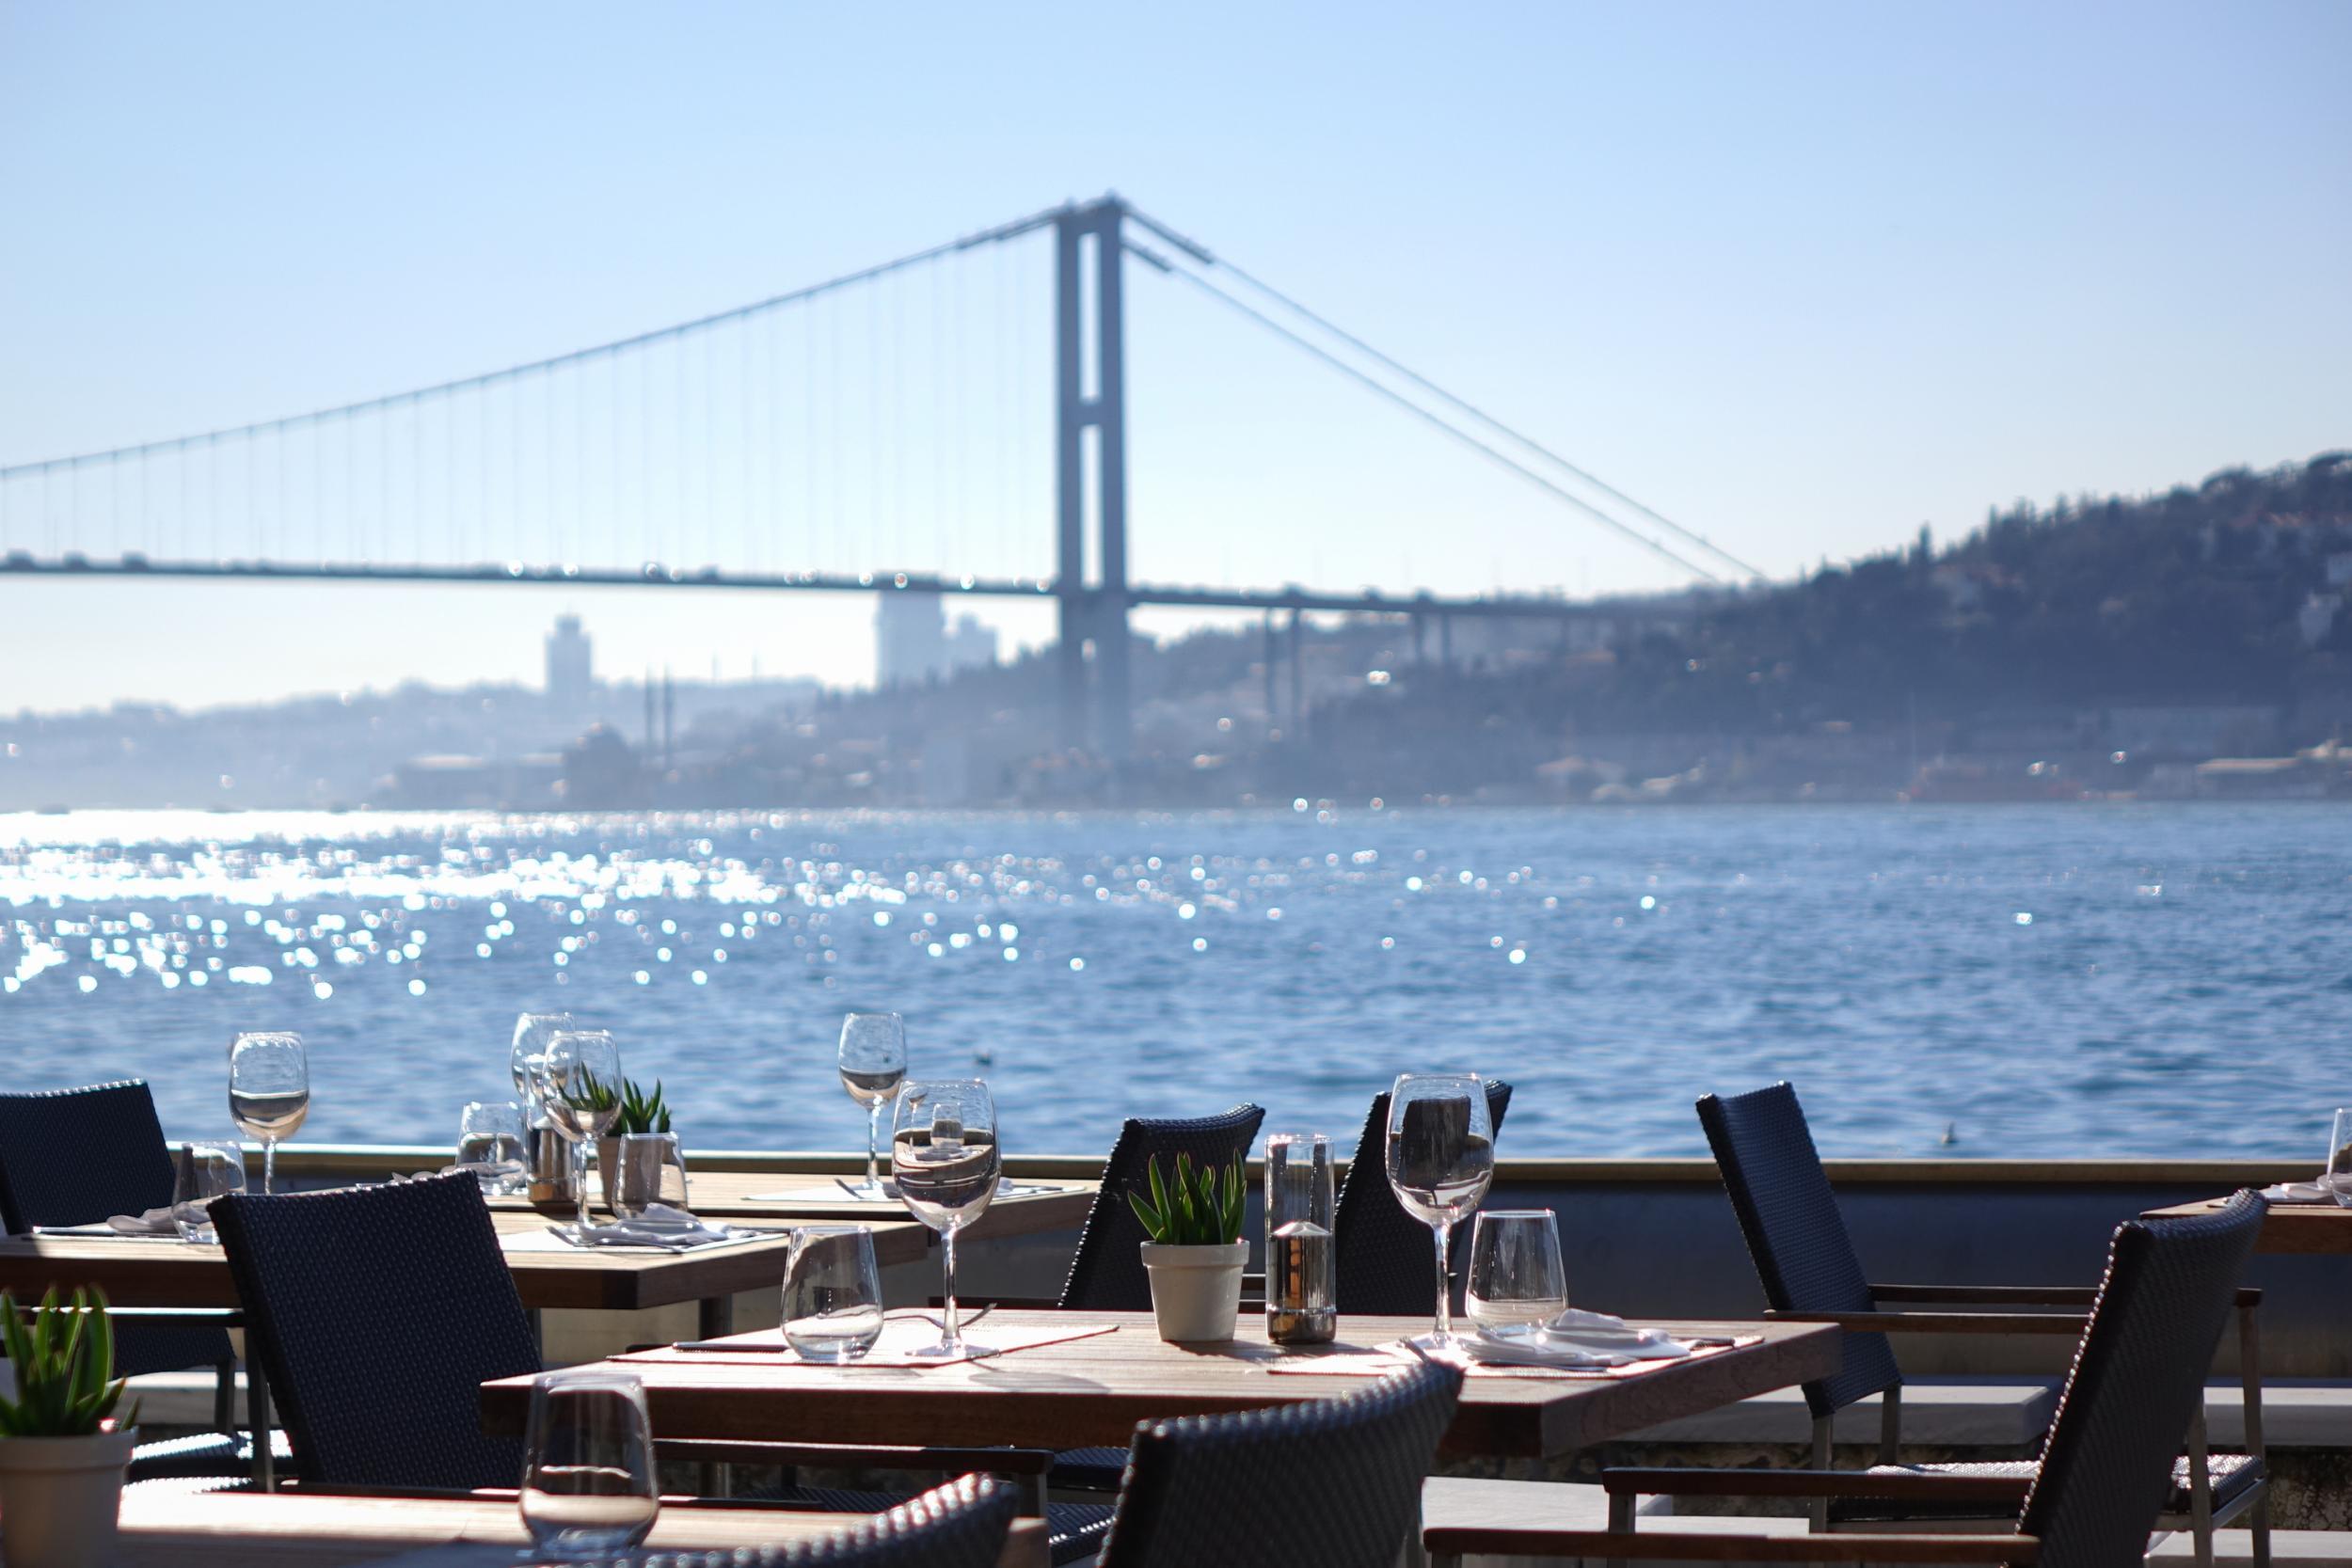 A 19th-century distillery with views of the Bosphorus